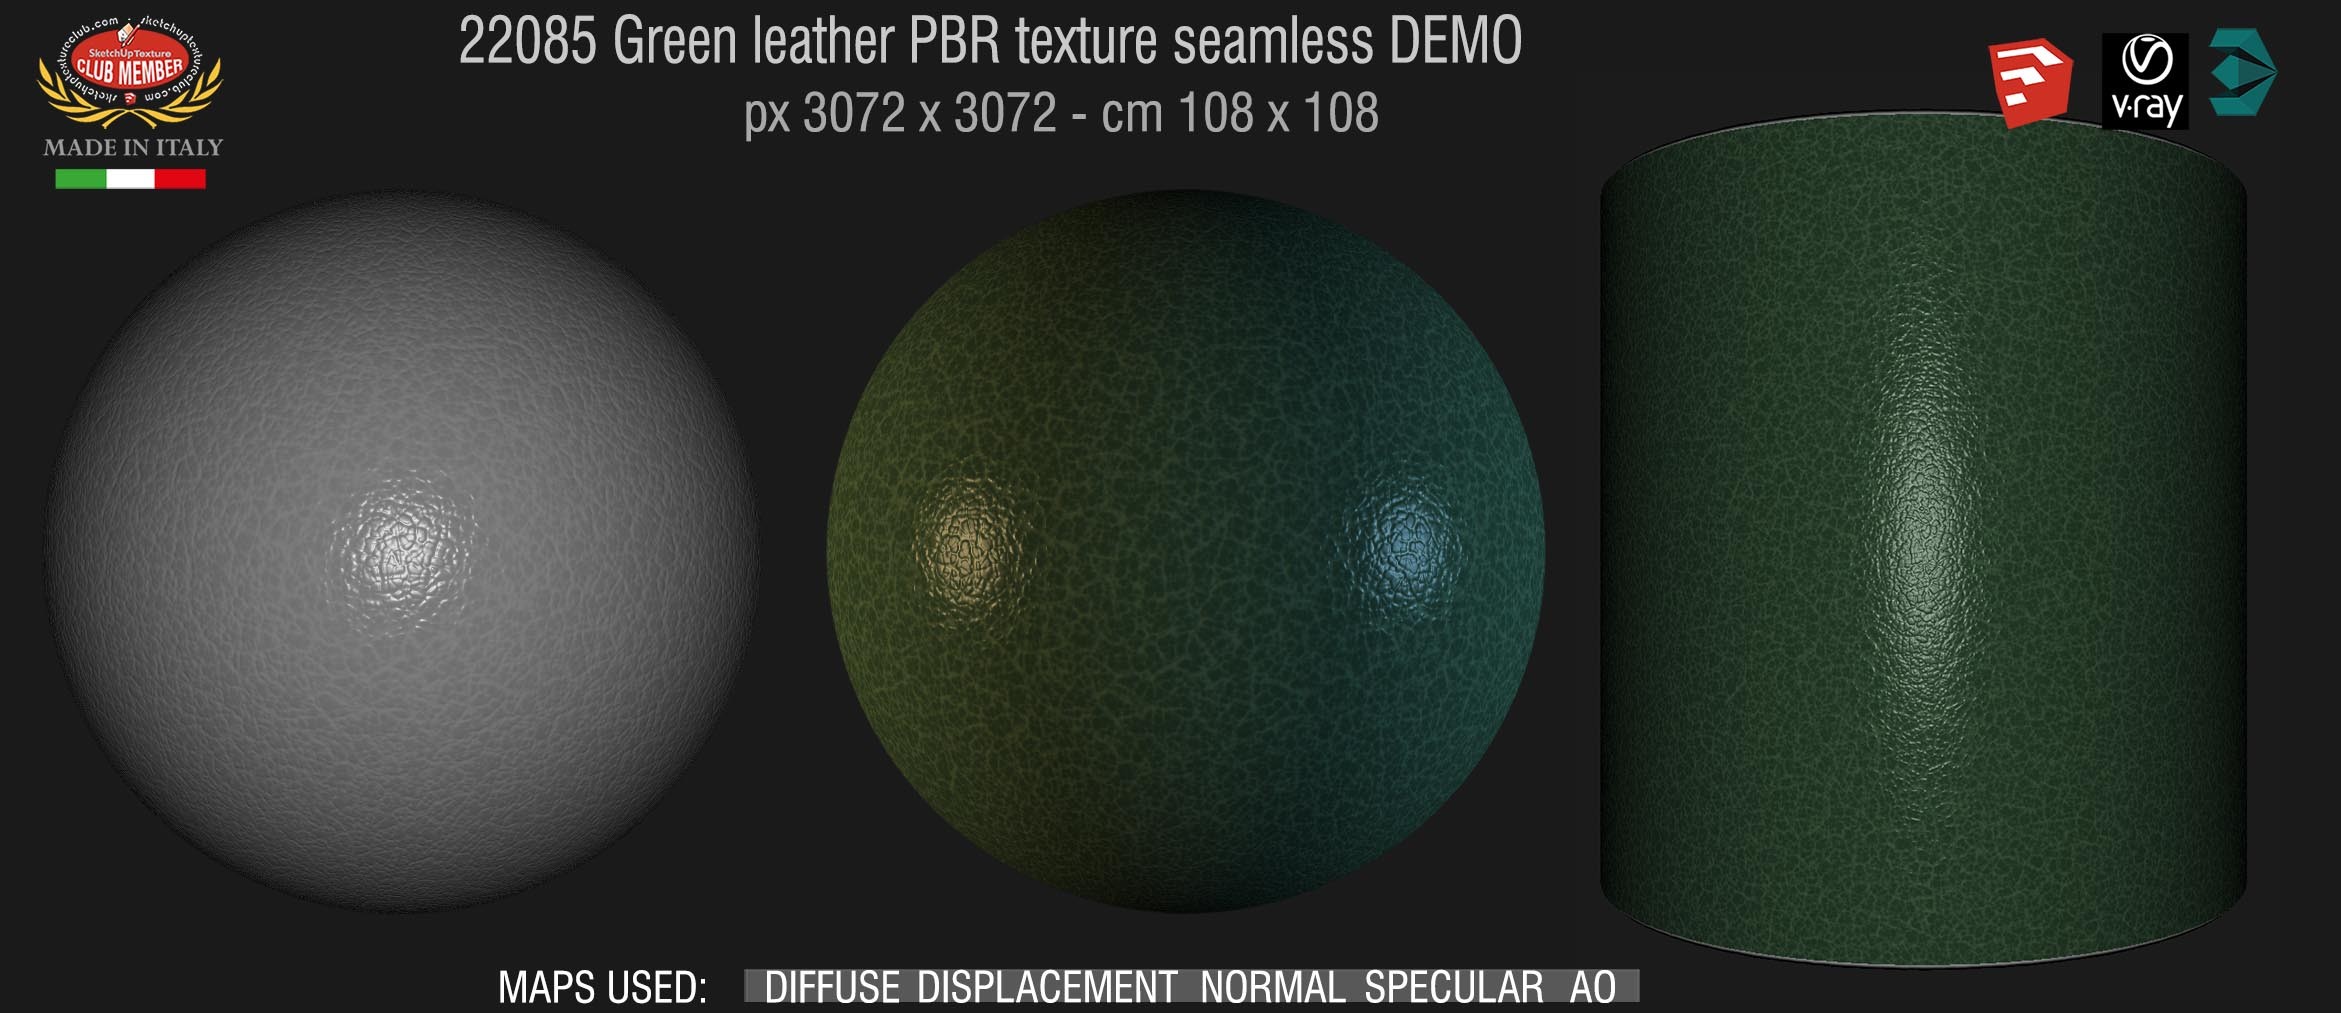 22085 Green leather PBR texture seamless DEMO